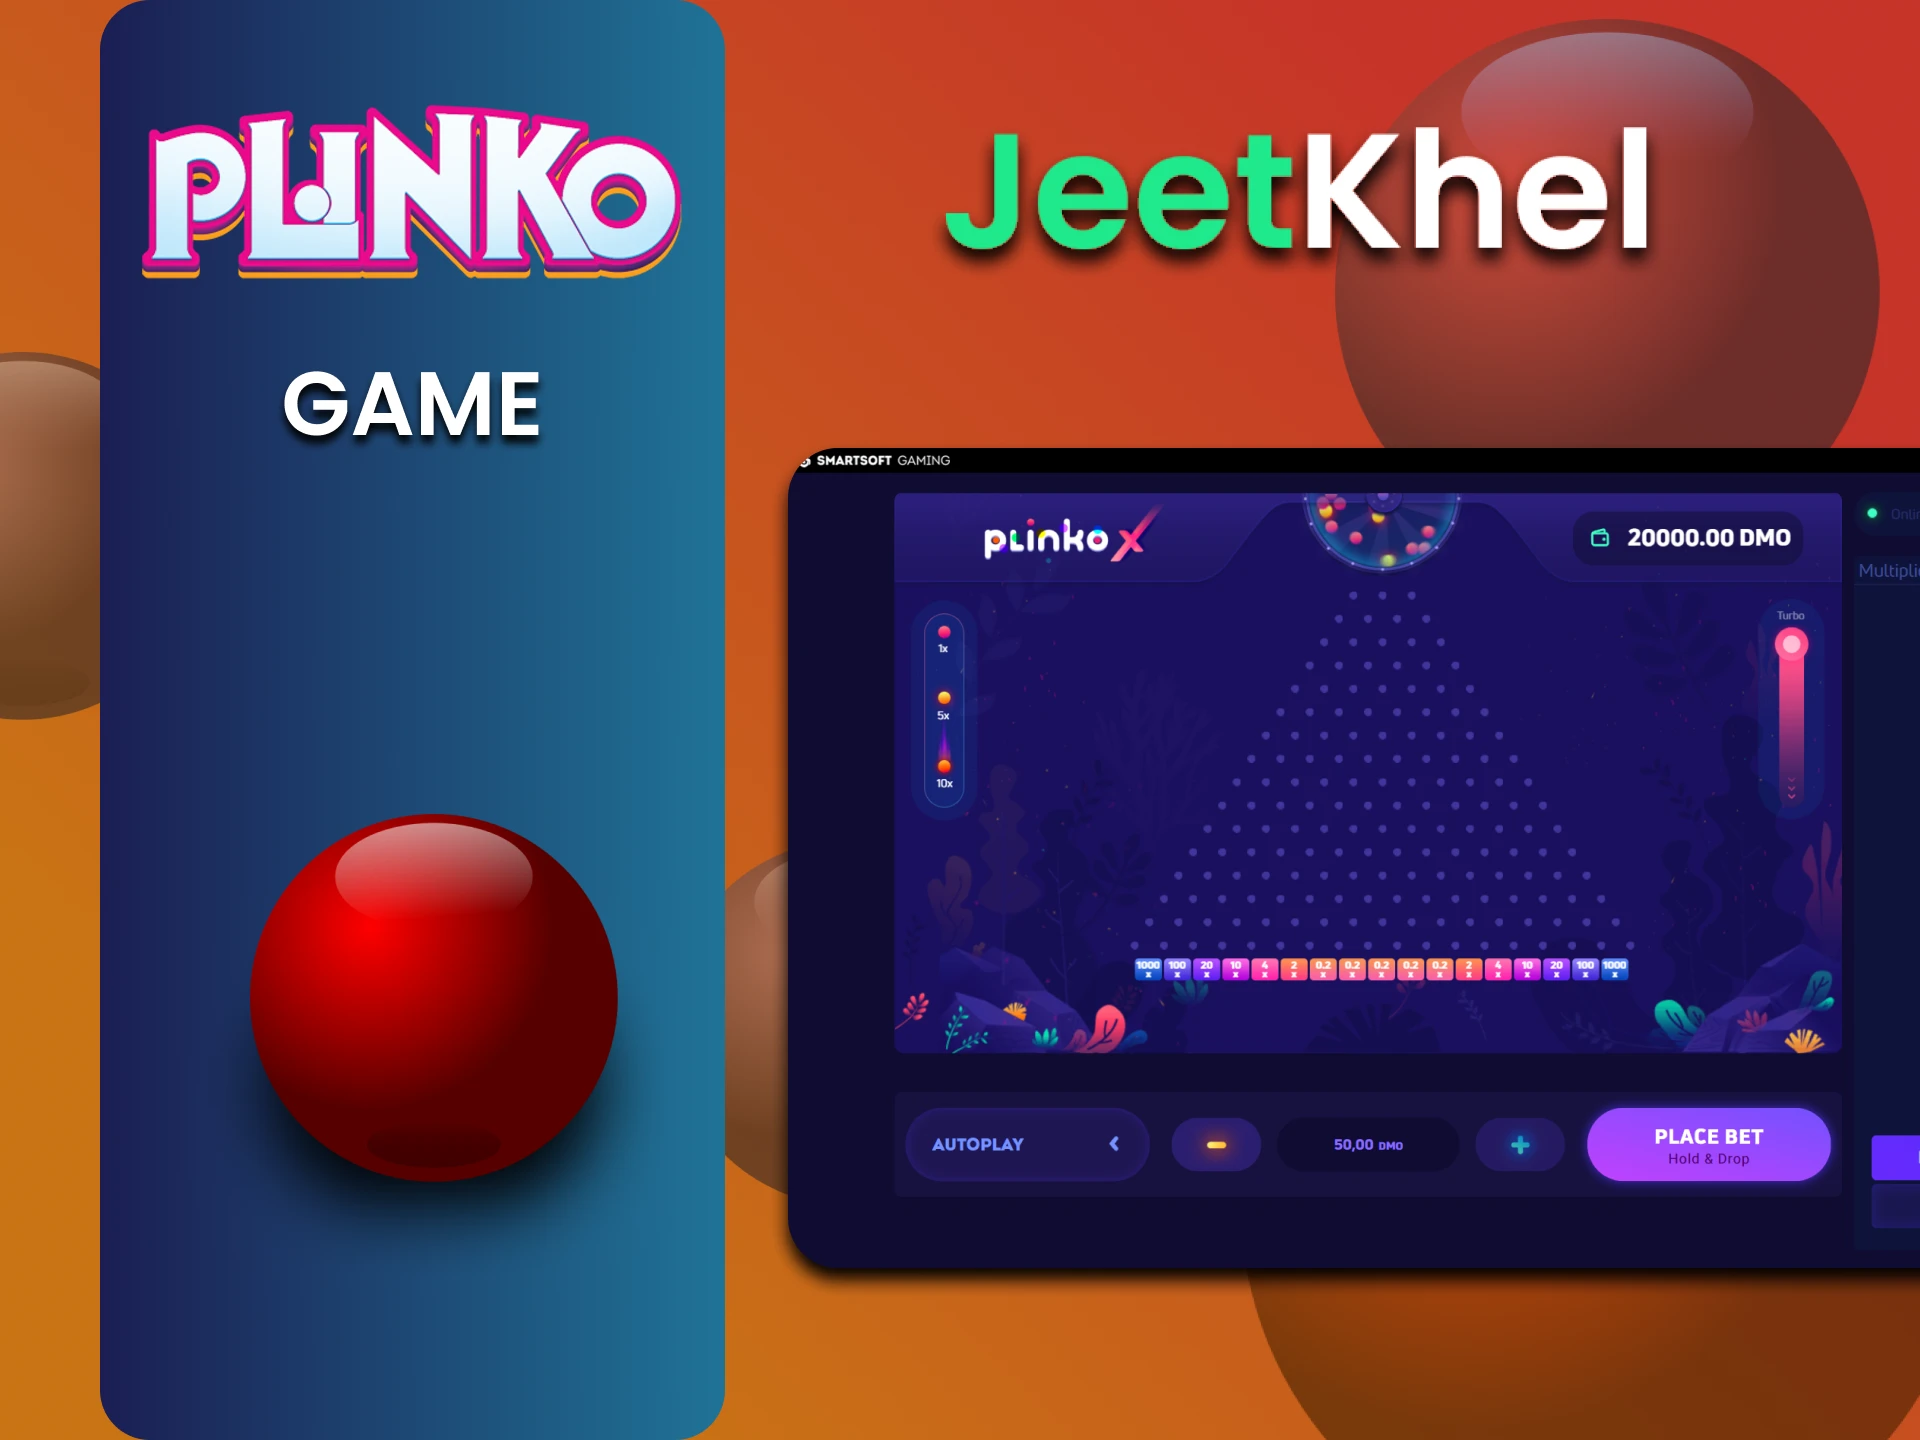 We will tell you everything about the Plinko game on JeetKhel.